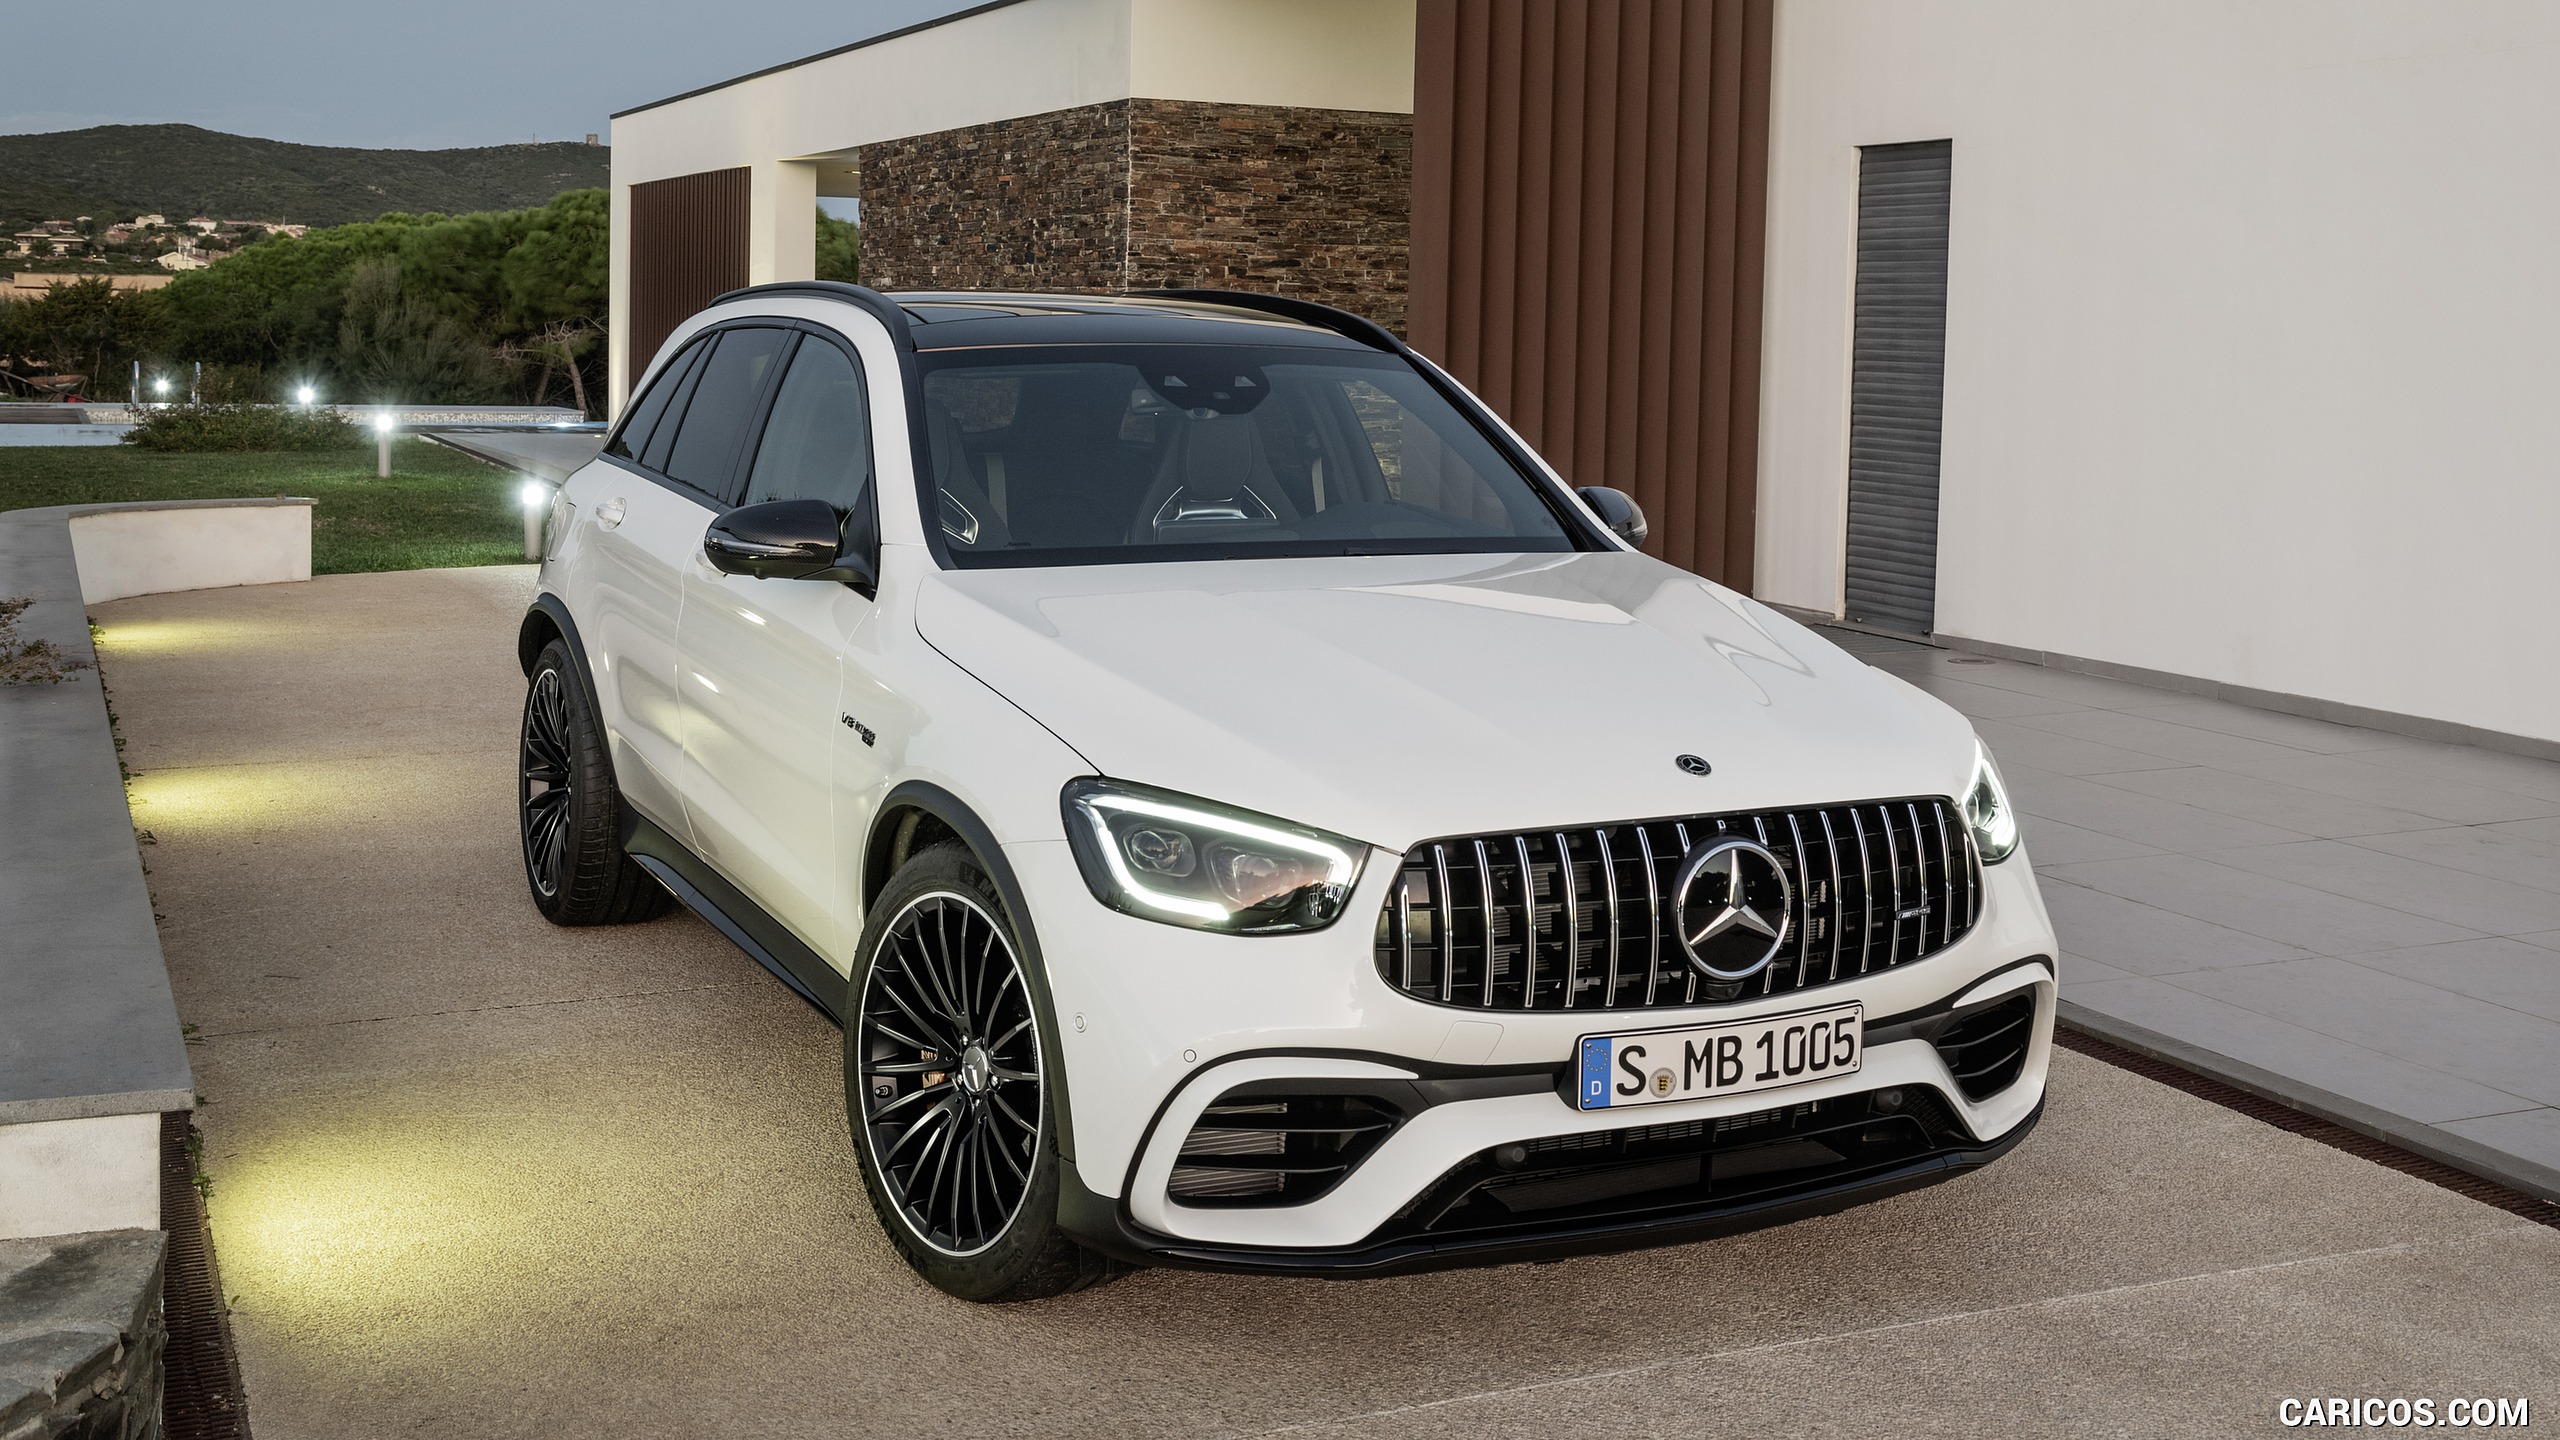 2020 Mercedes-AMG GLC 63 S 4MATIC+ - Front, #26 of 118